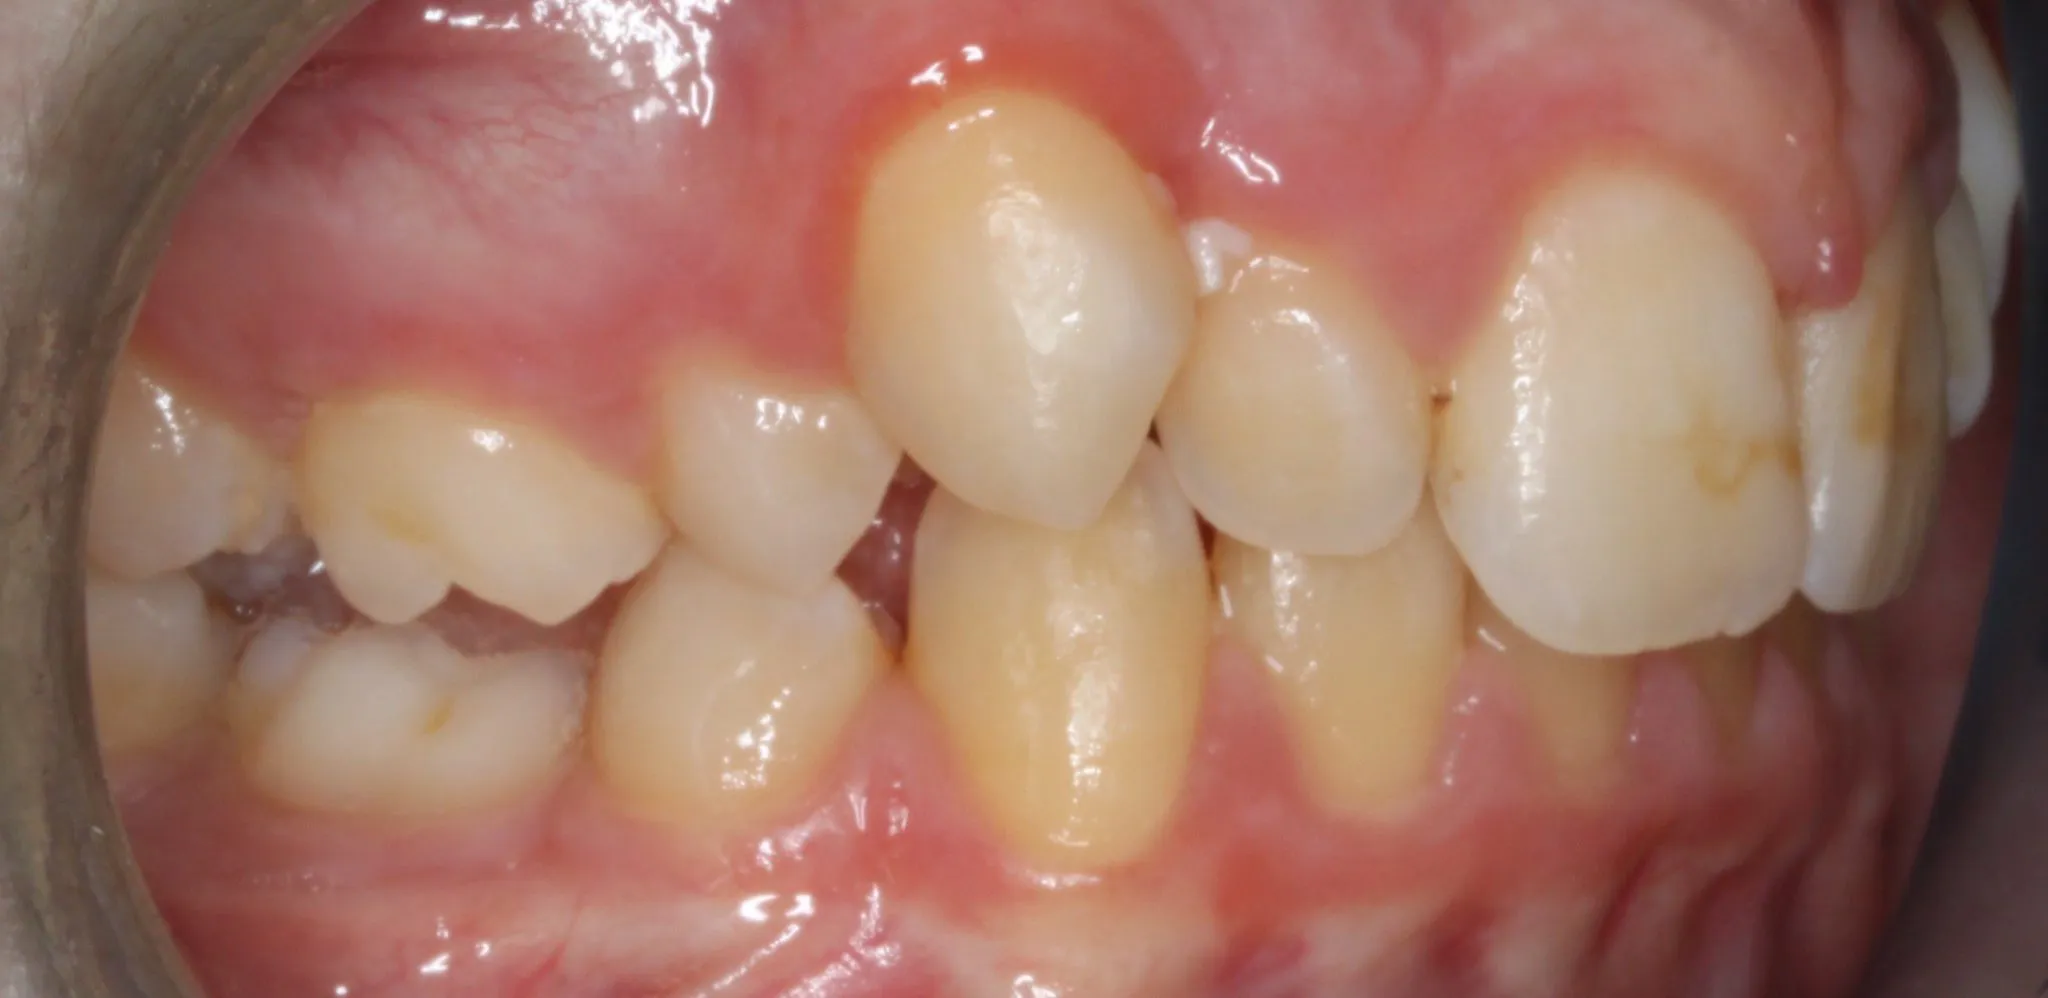 Before photo (left side view of teeth): Dental Expanders & Braces for Severe Crowding, Case Study #1